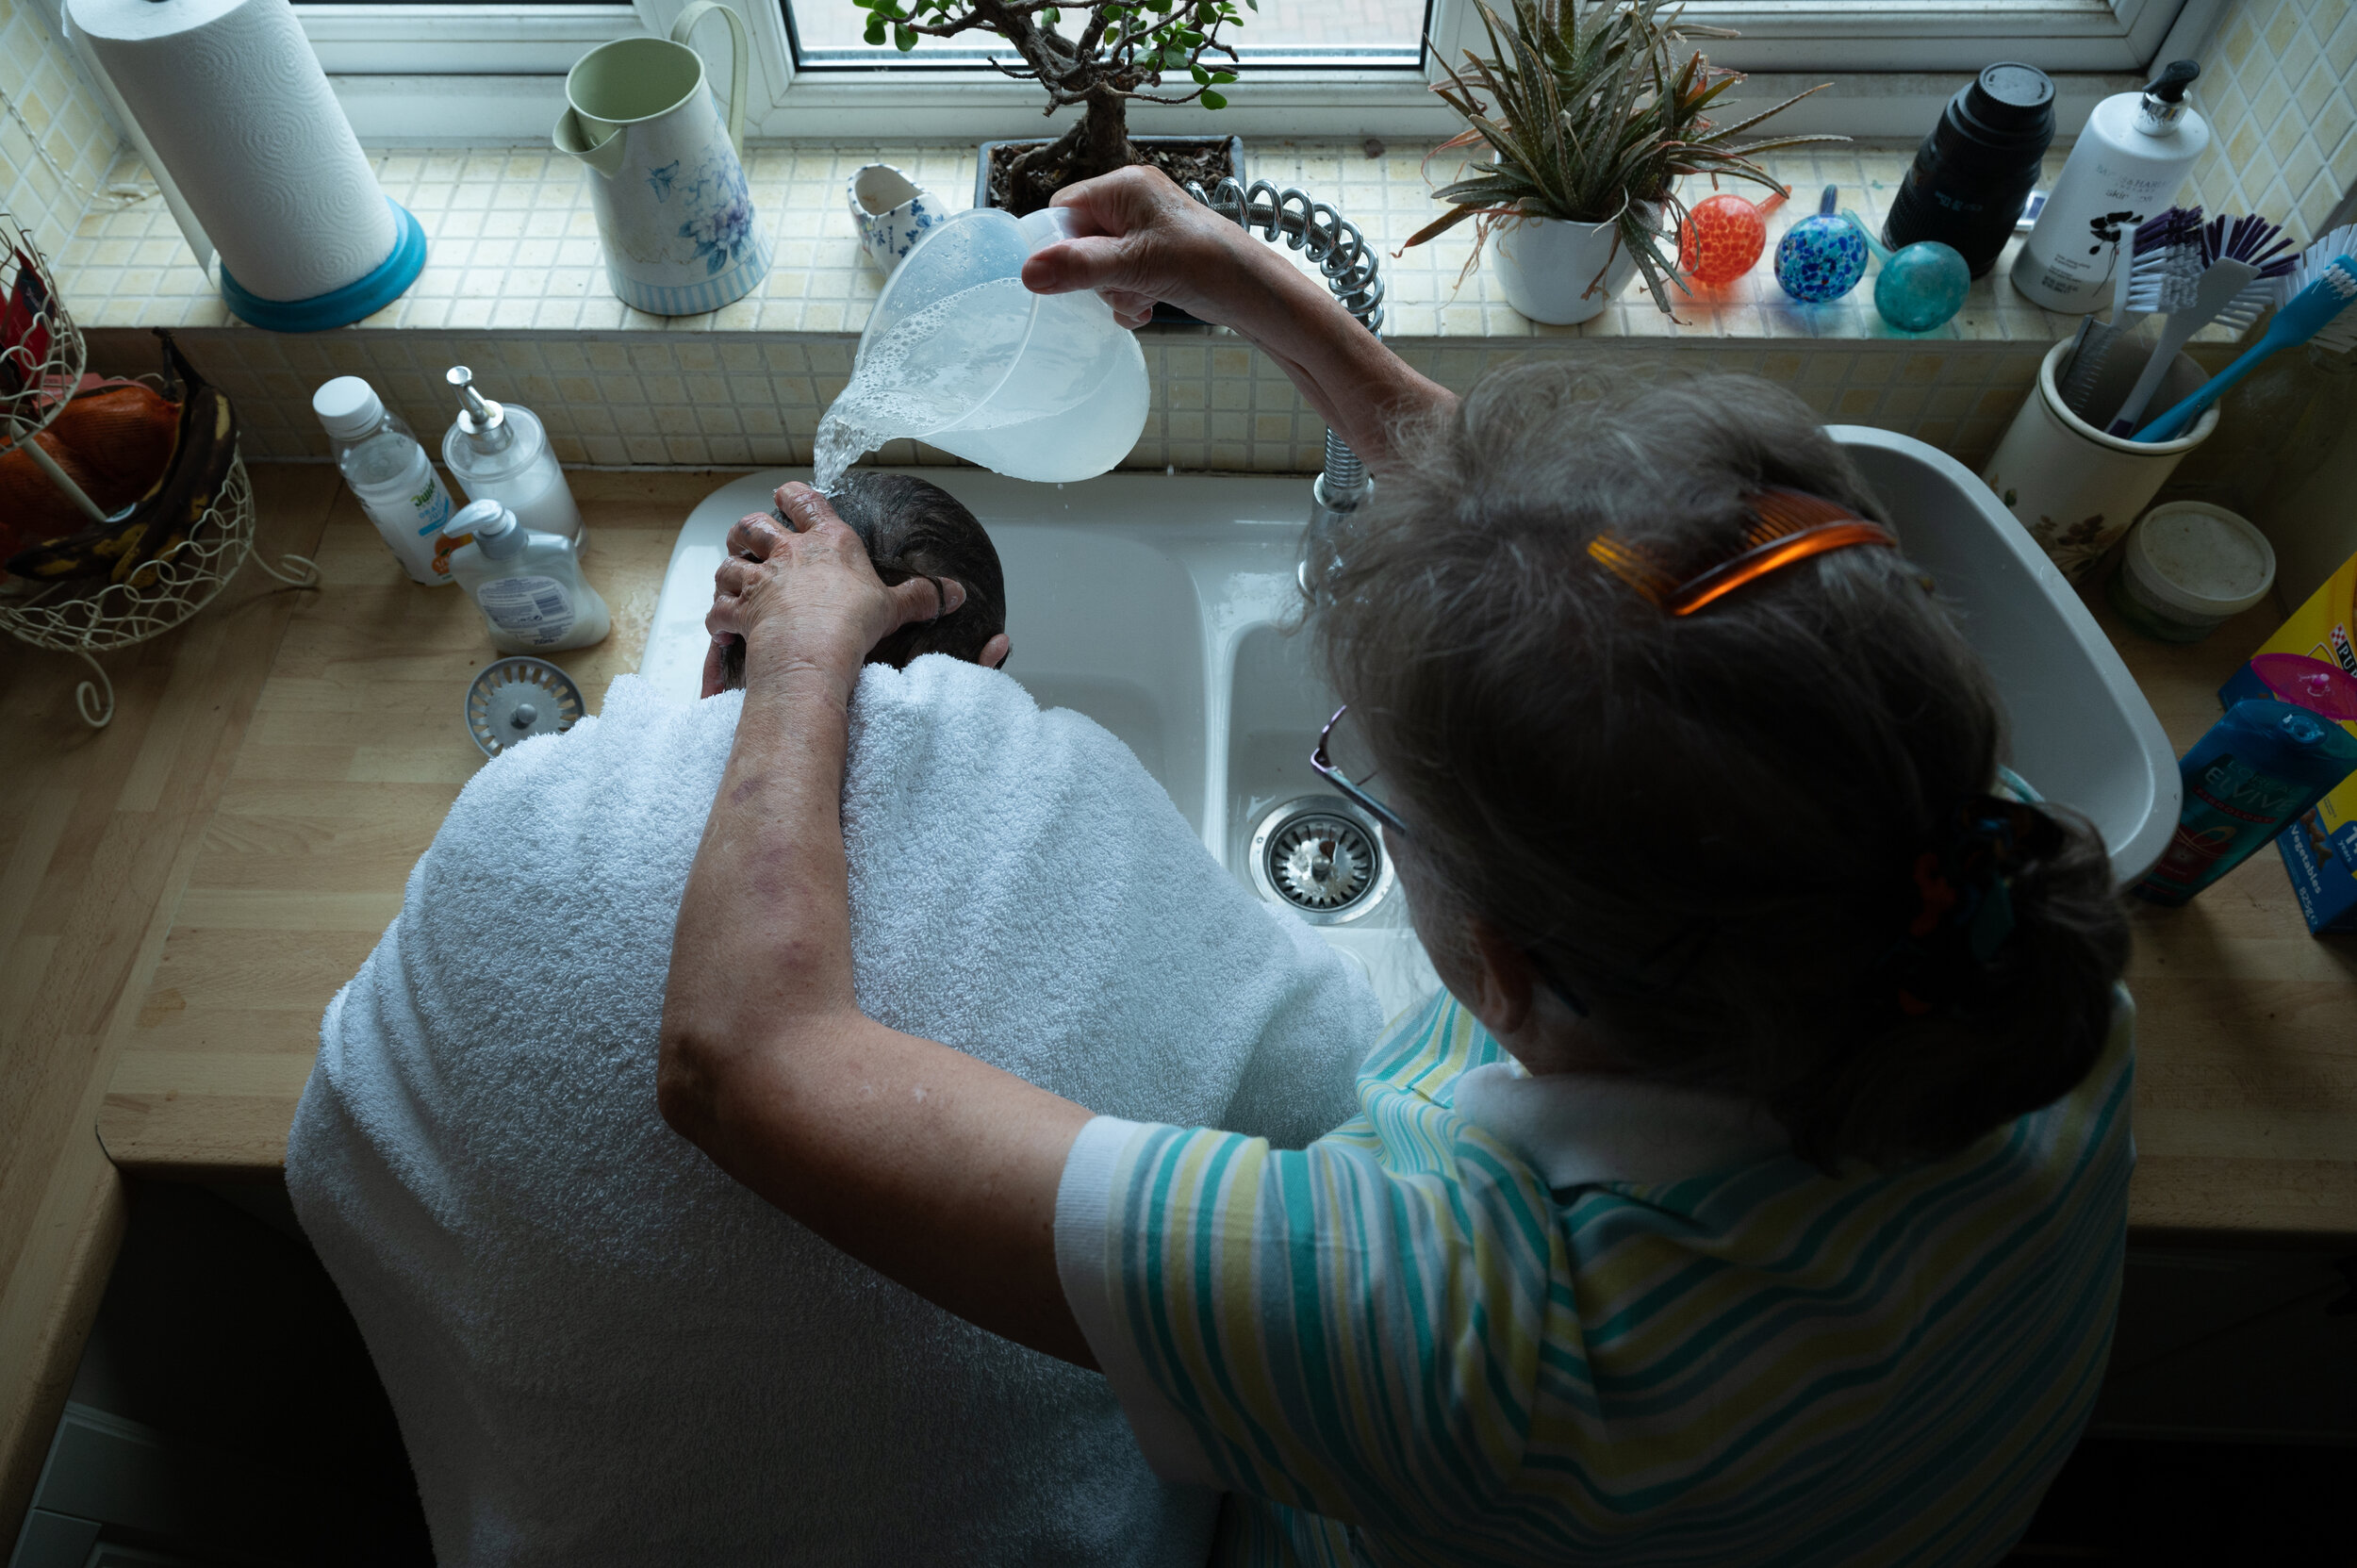  A friend washes mum's hair. After being diagnosed with dementia, friends were few and far between. Mum became isolated as friends and family began to distance themselves. A common occurence people with dementia. 